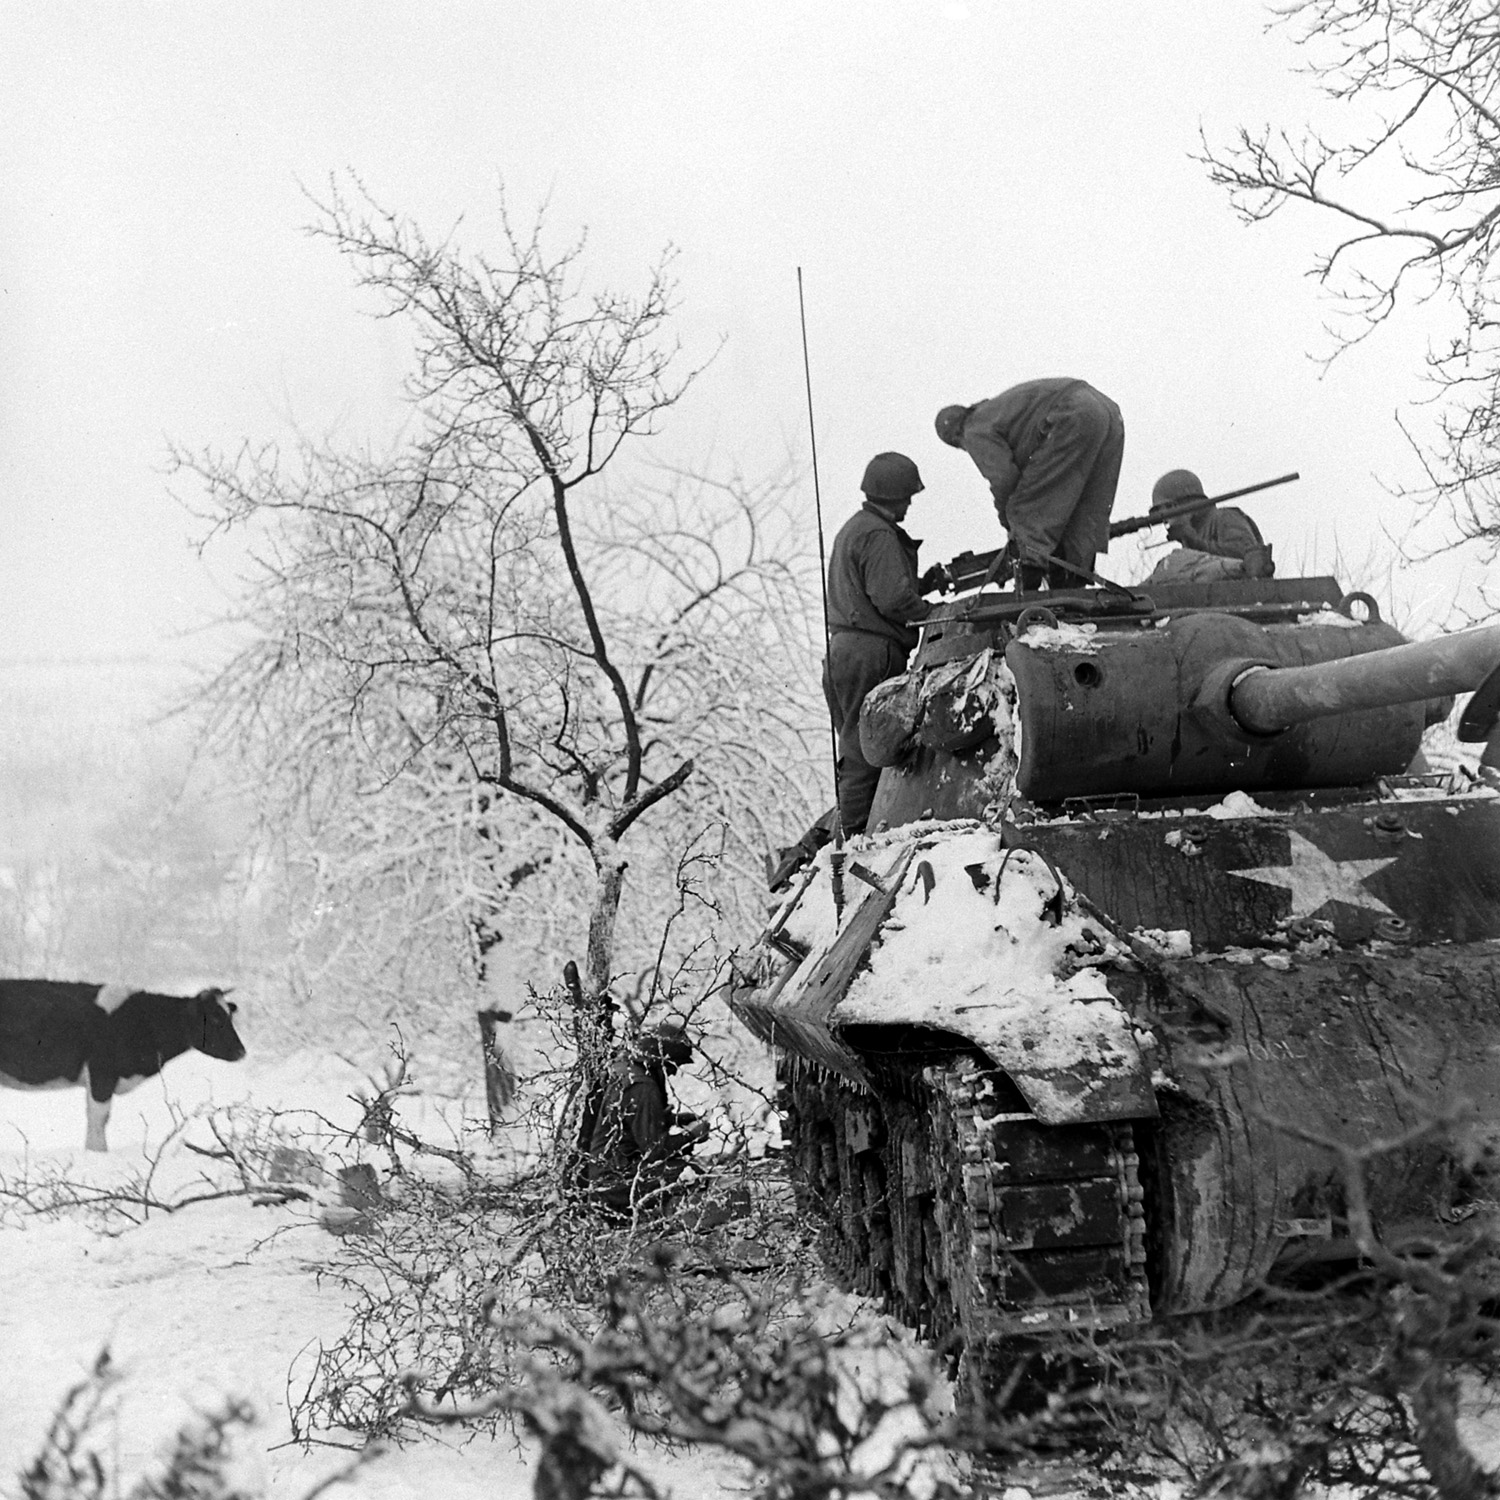 American soldiers aboard a tank in a snow-covered Ardennes field, Battle of the Bulge, December 1944.